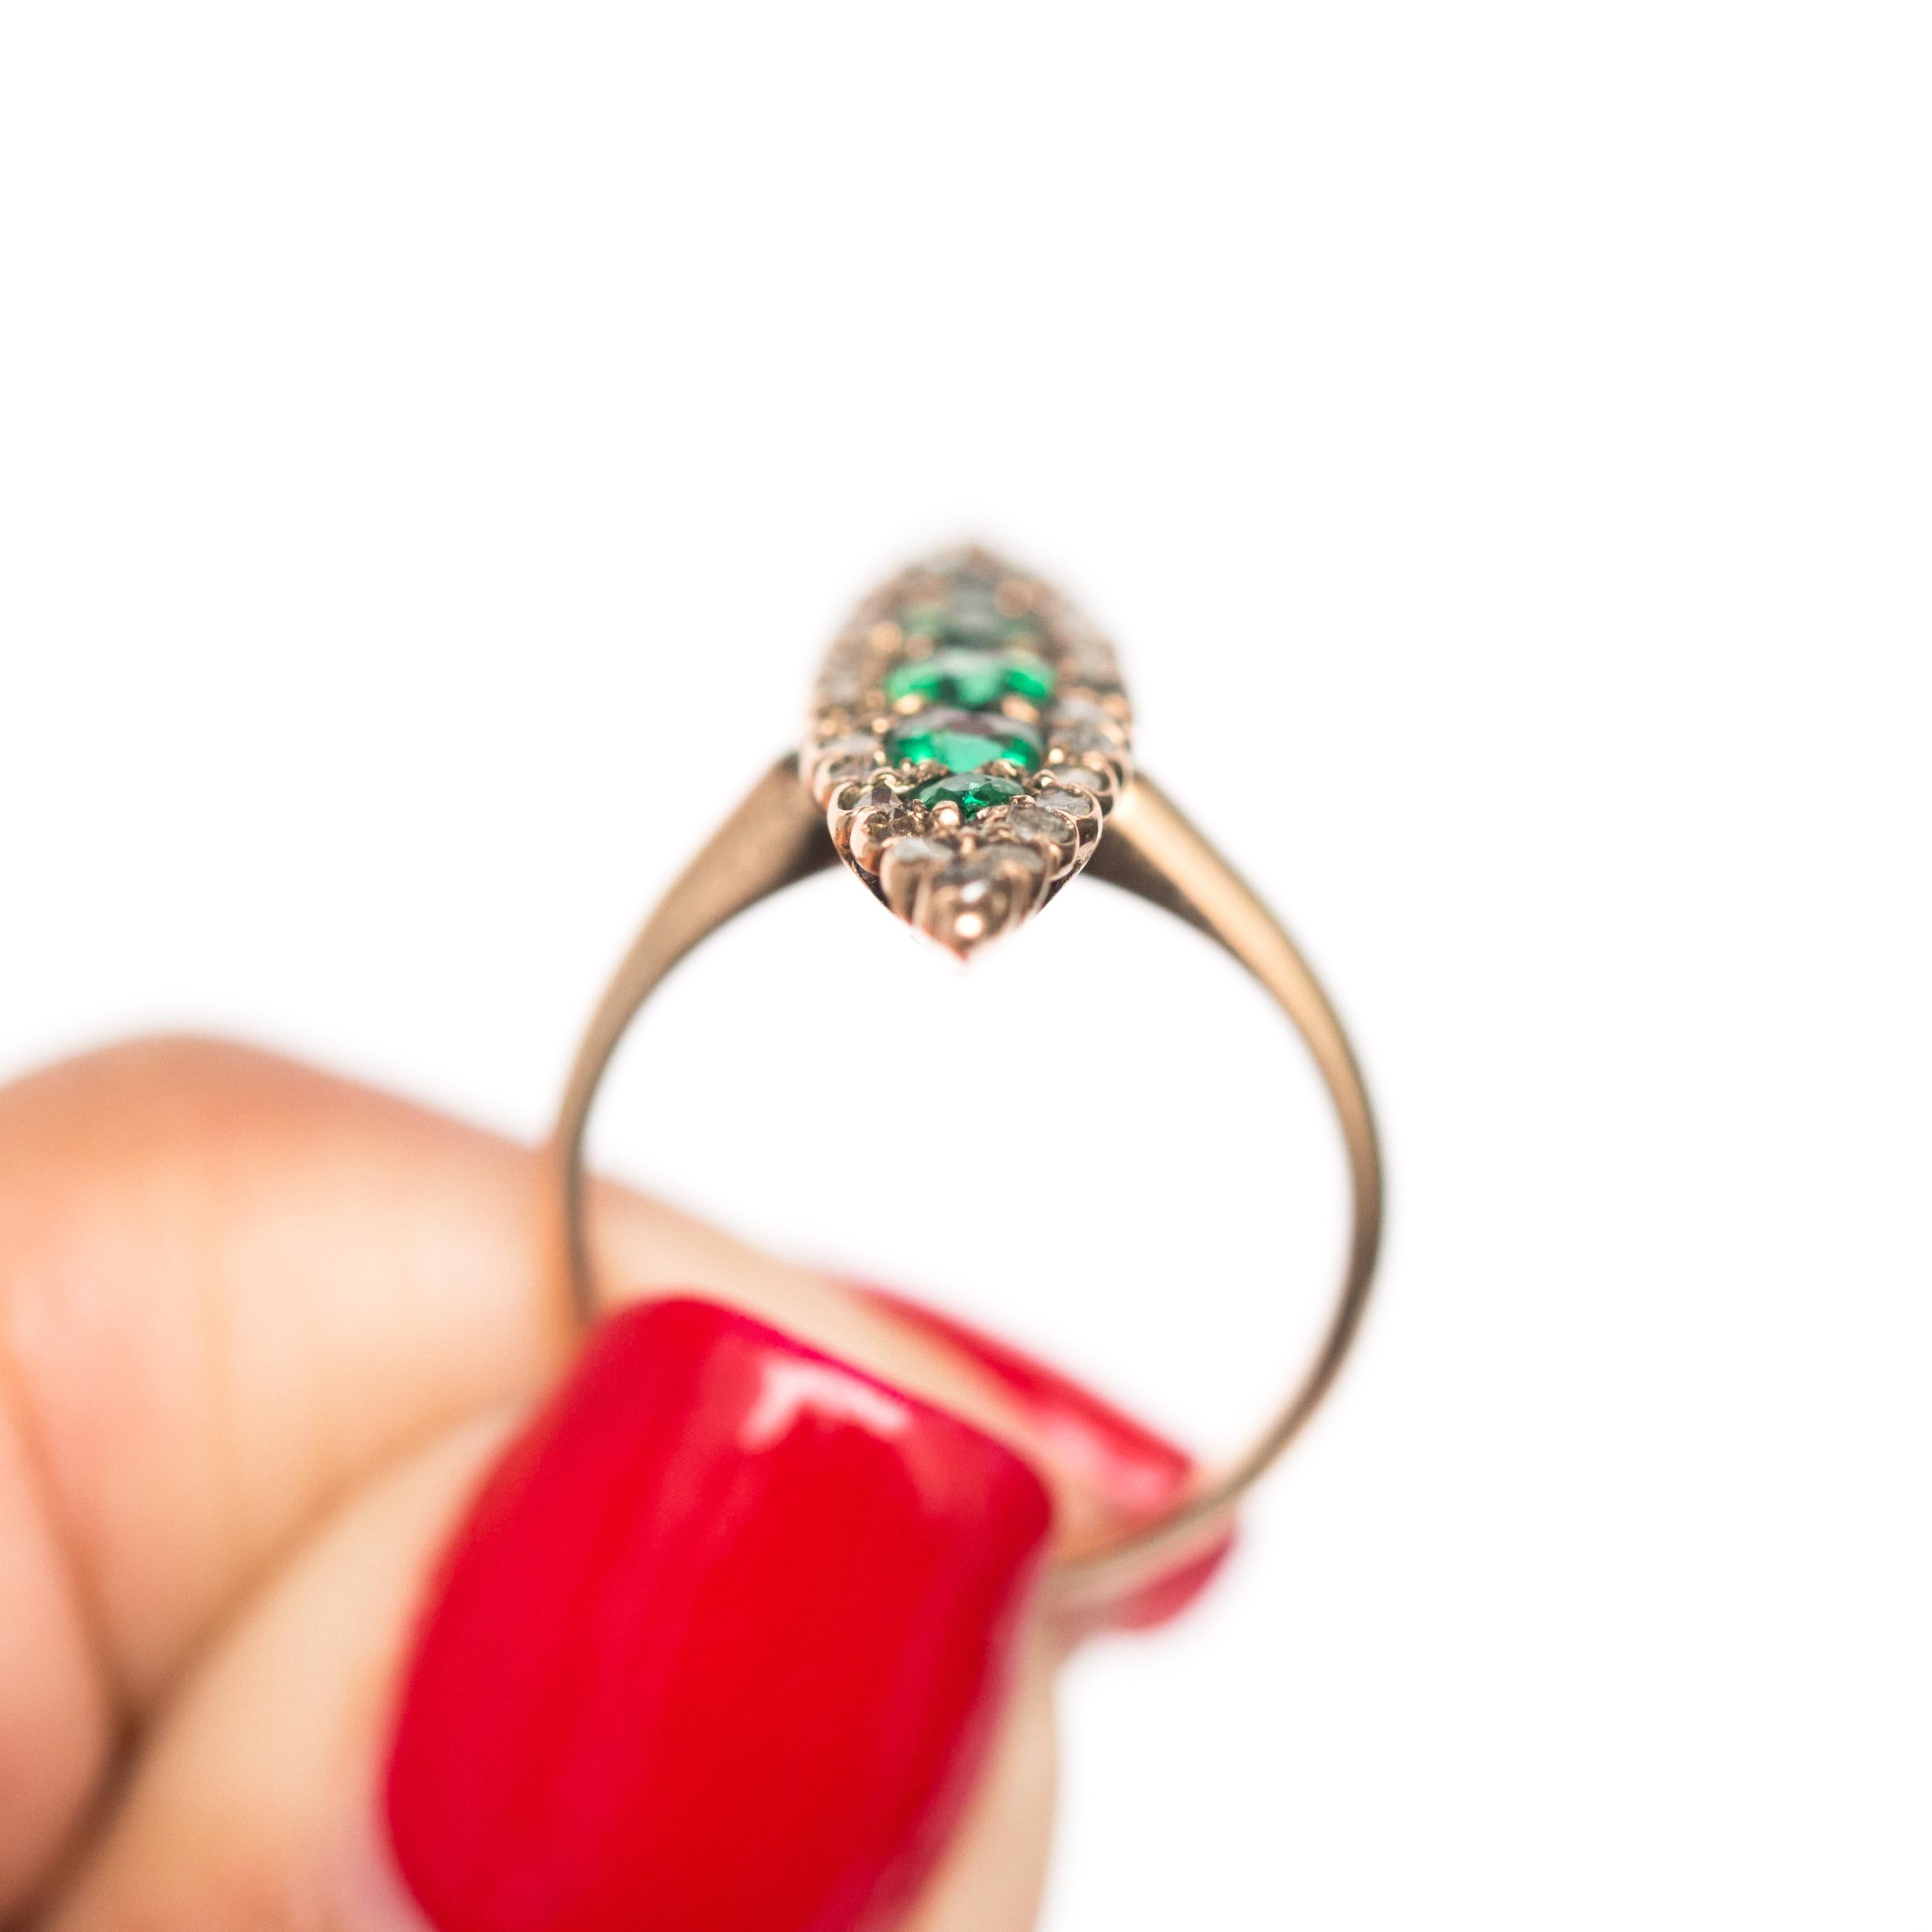 1880s Victorian 14 Karat Rose Gold Emerald and Diamond Cocktail Ring For Sale 2